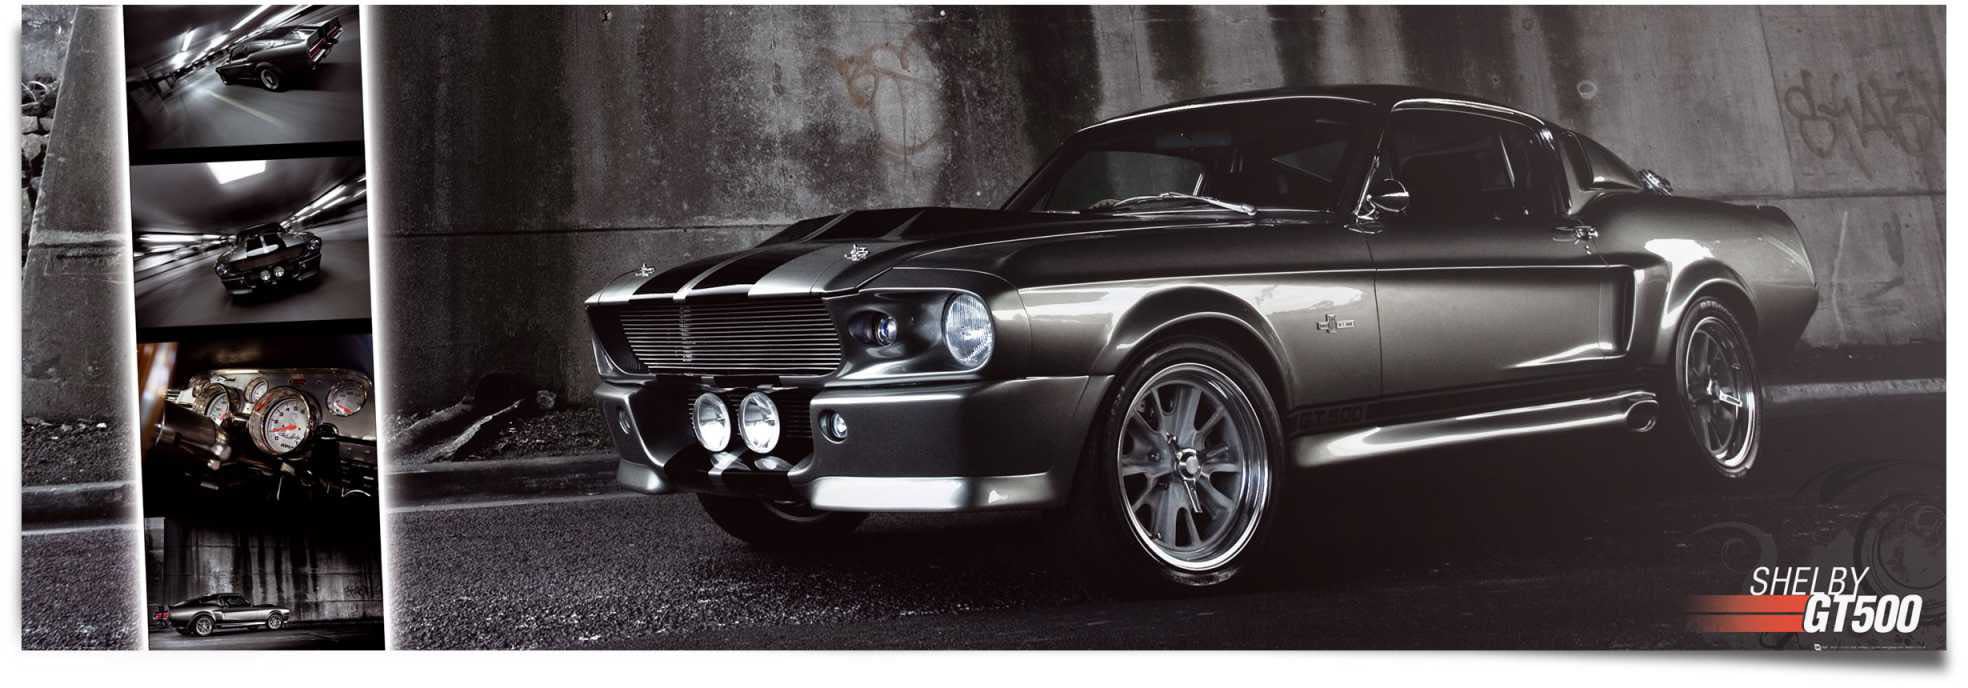 (1 »Ford Poster Easton auf Raten Mustang GT500«, Reinders! kaufen St.)